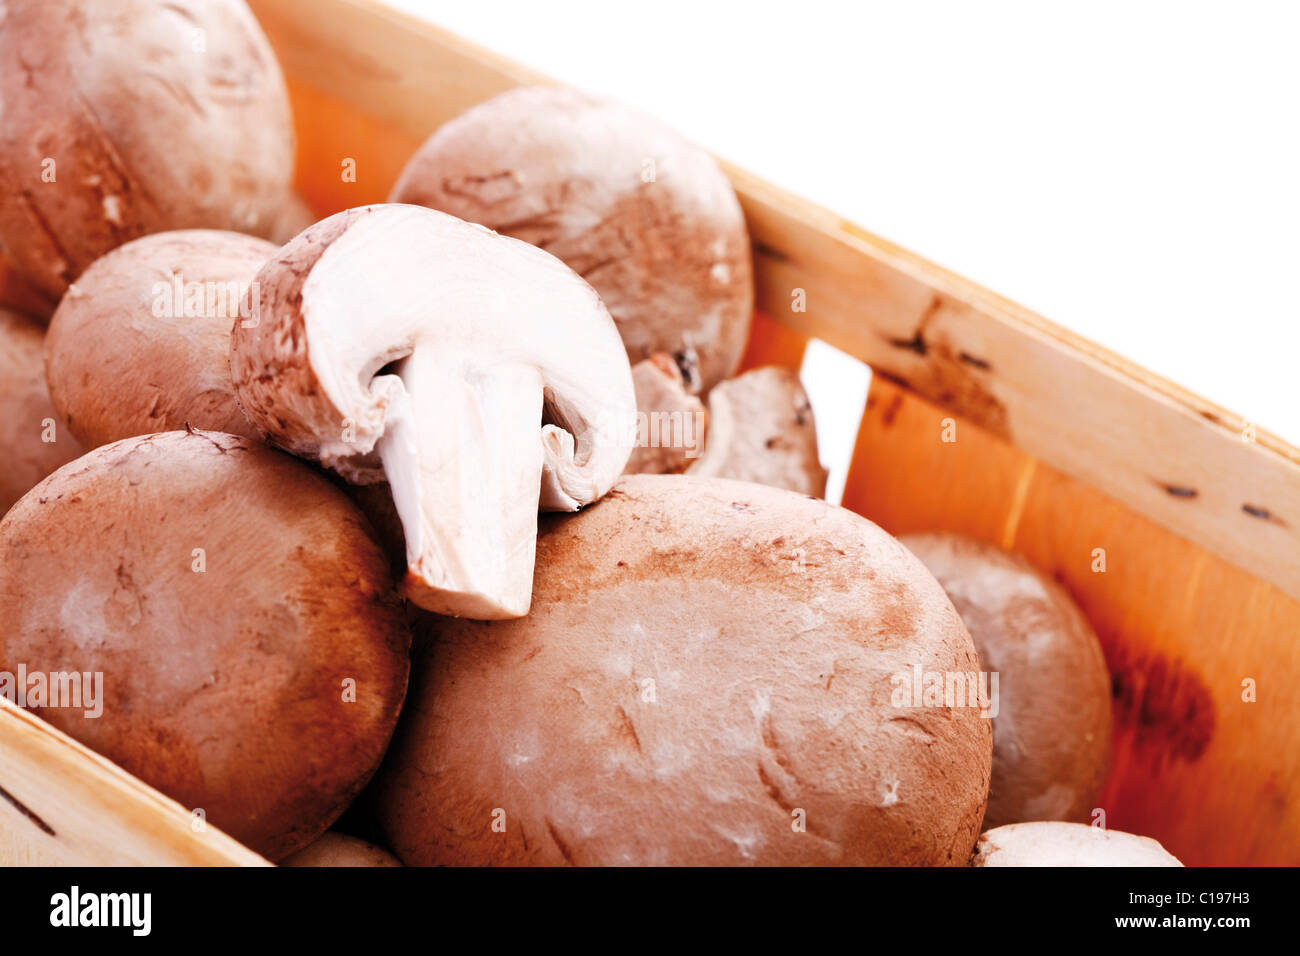 Brown mushrooms in a wooden box Stock Photo